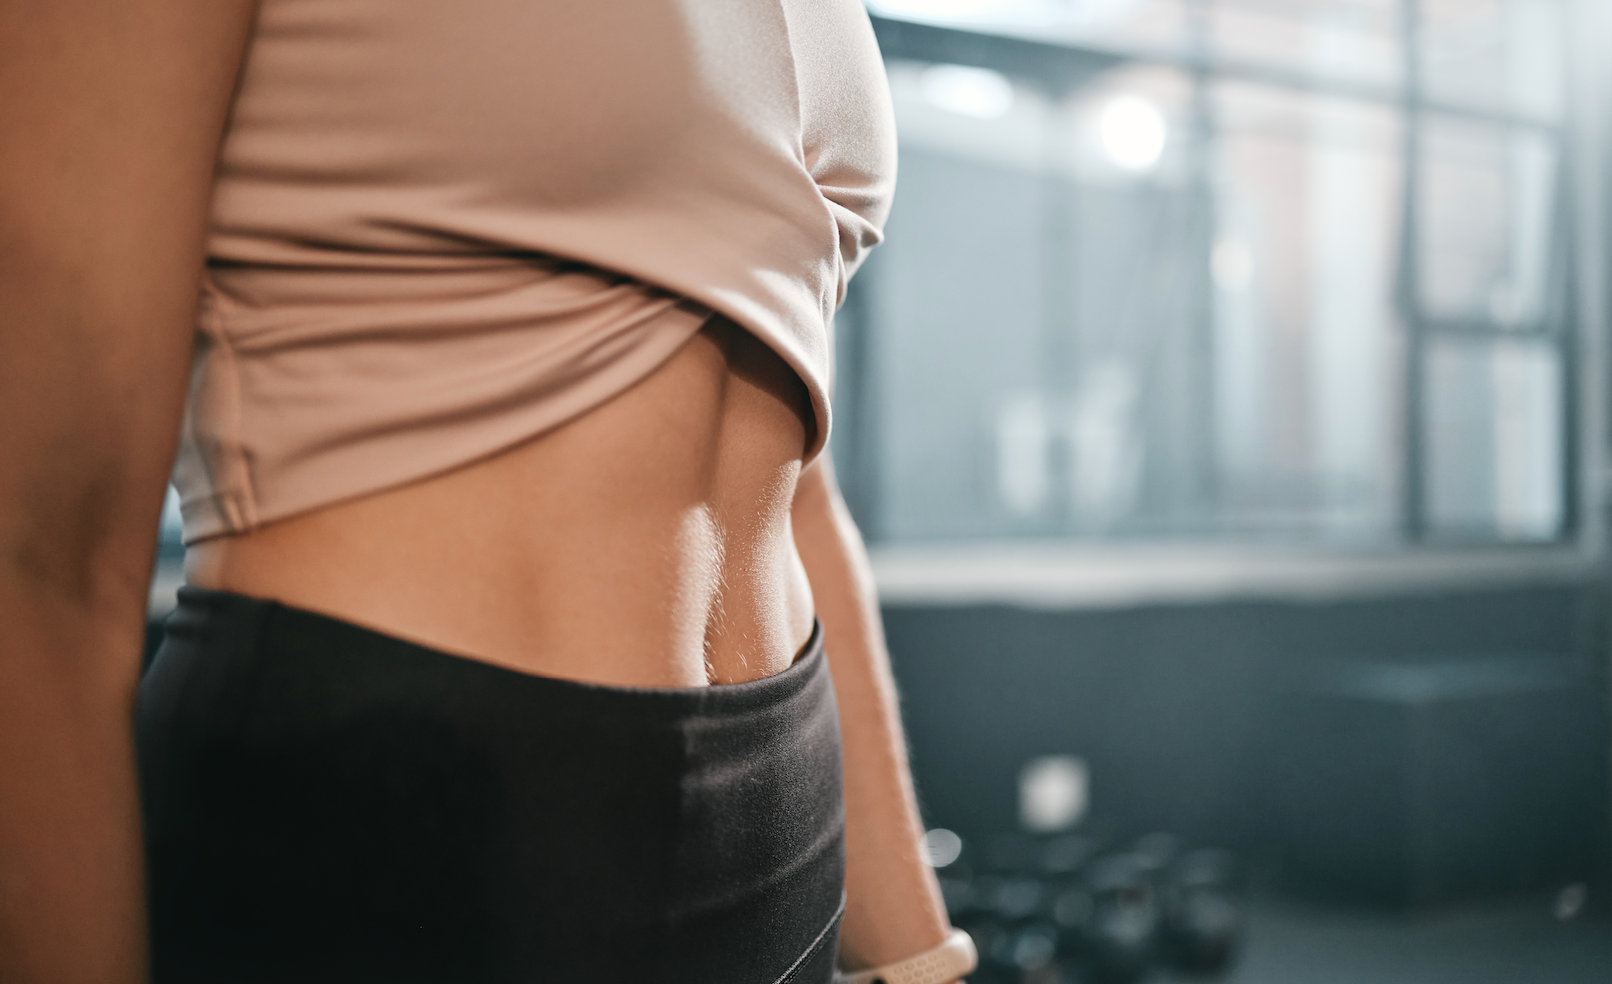 4 Exercises That Can Help With Your Tummy Tuck Recovery || how soon can you exercise after a tummy tuck, tummy tuck exercises at home, tummy tuck recovery tips